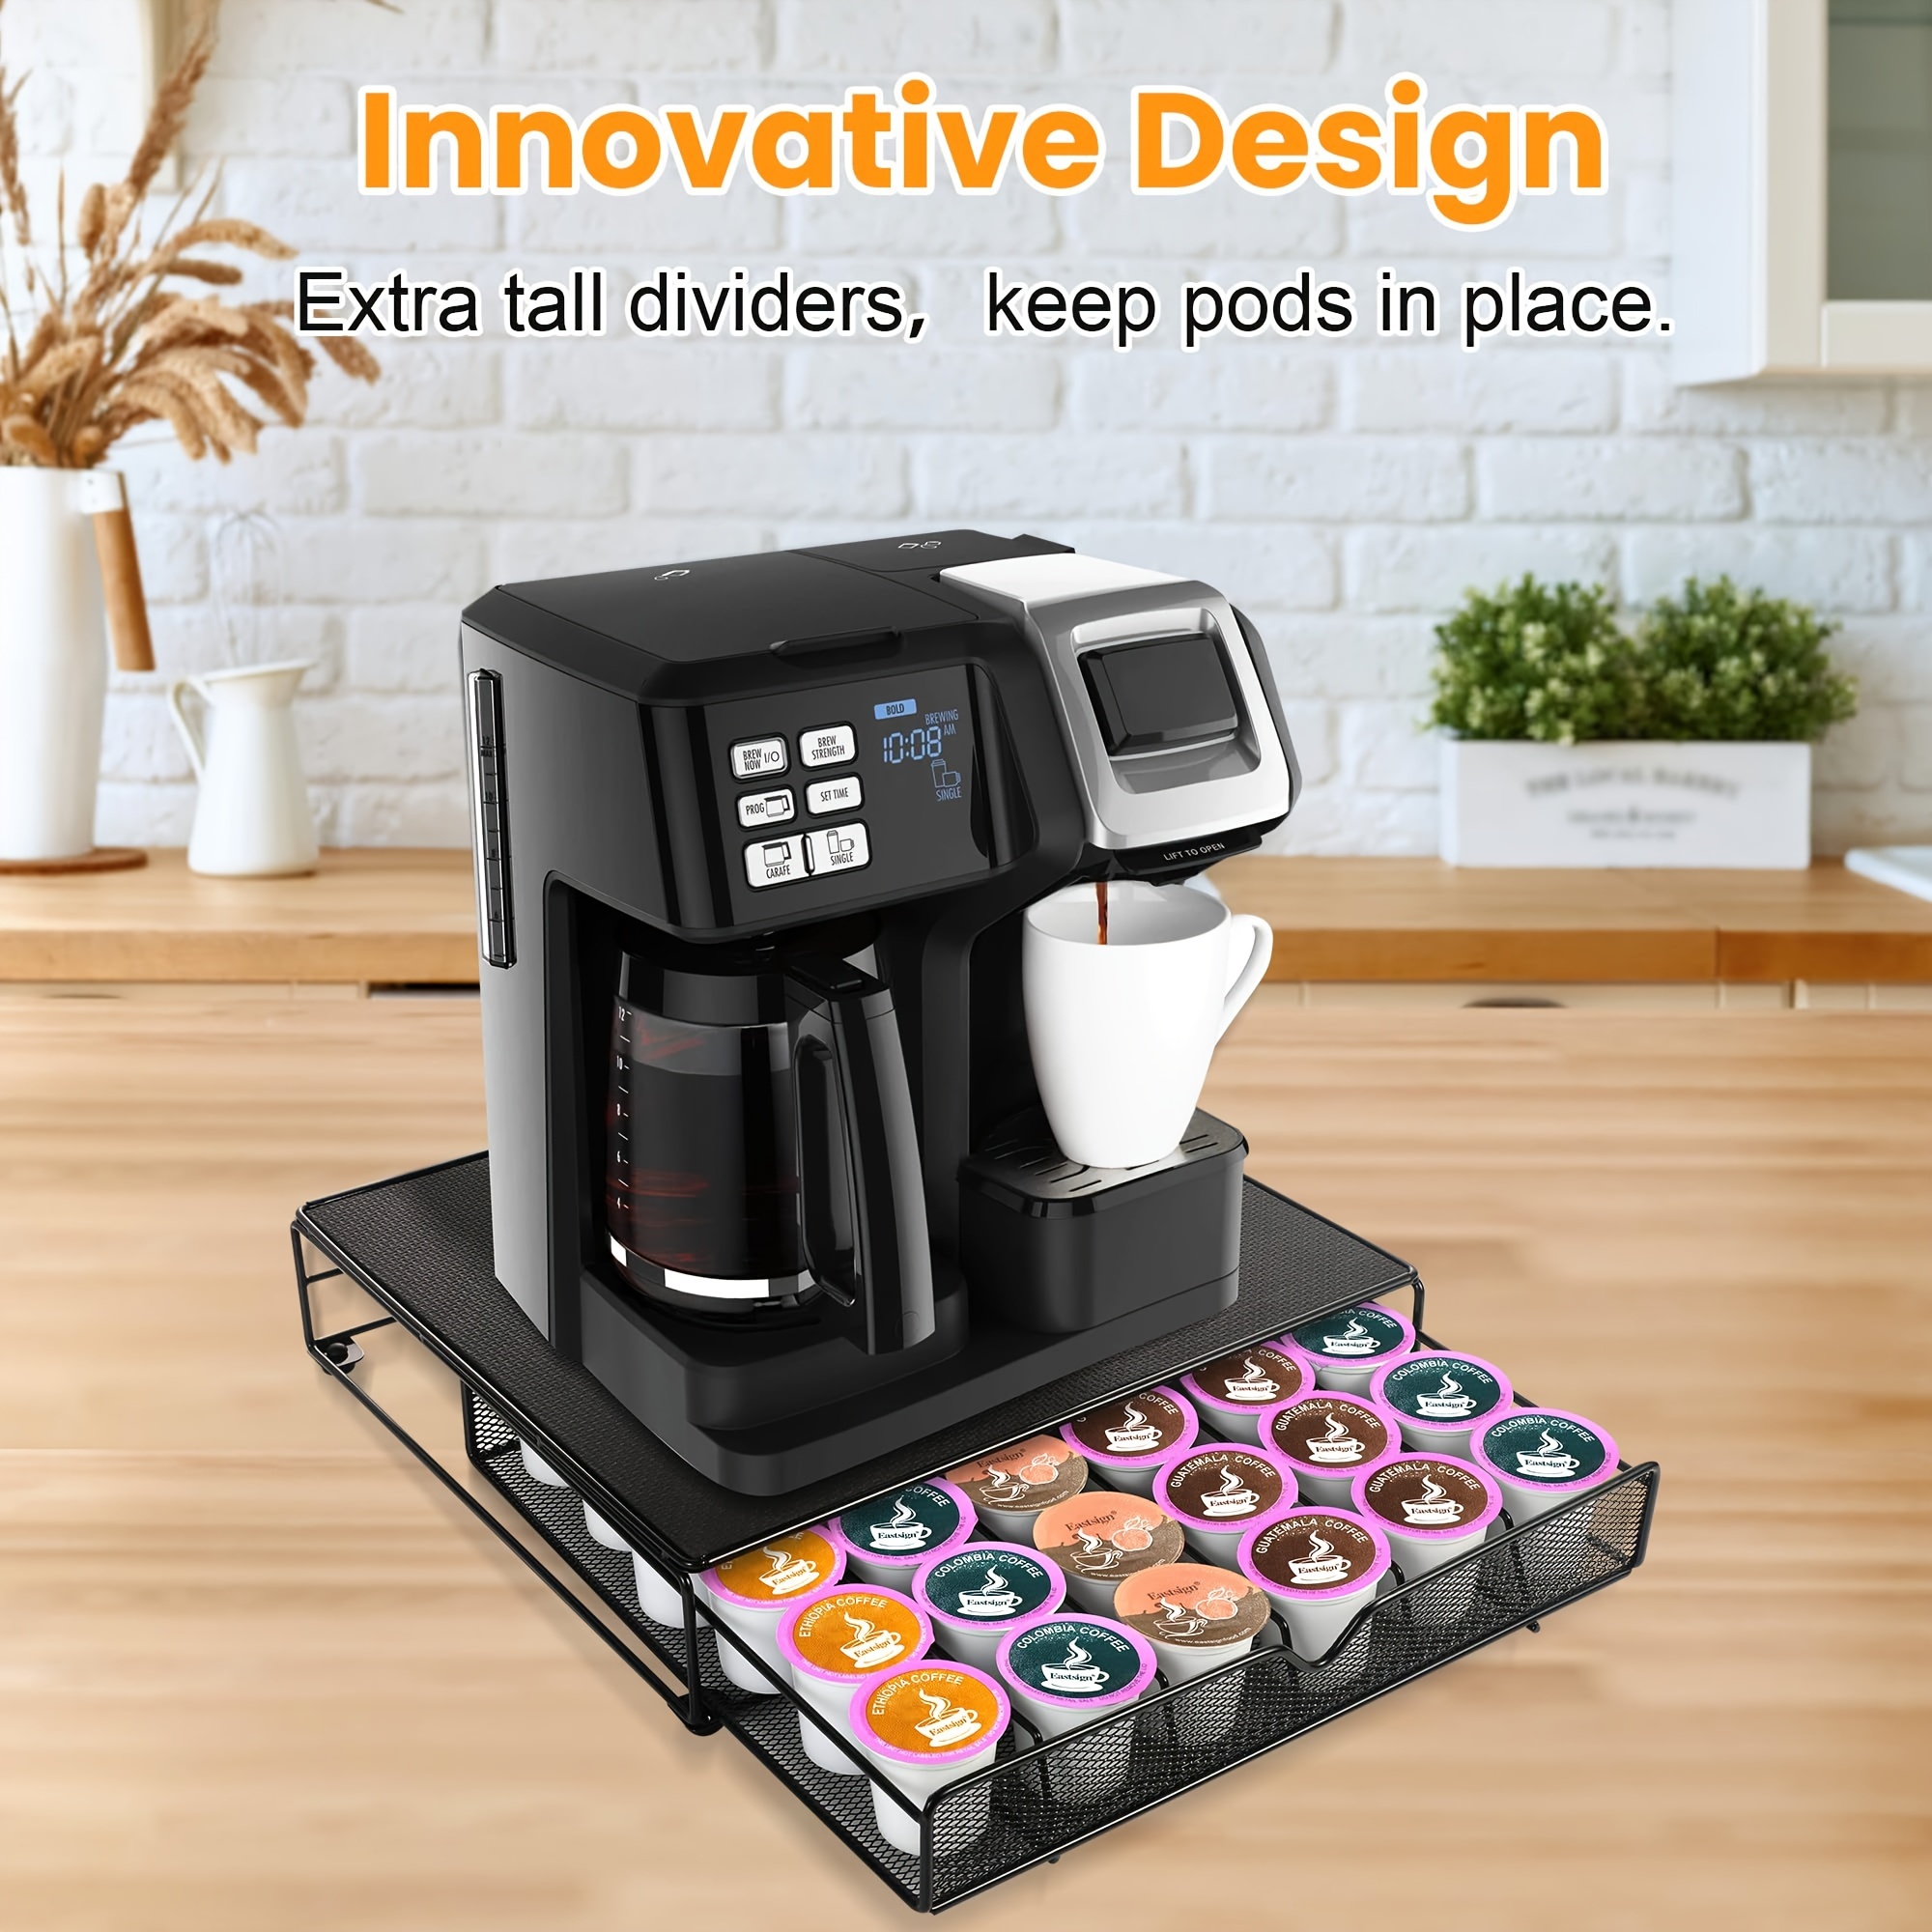 

1pc 36 Pods Kcup Holder Drawer, Coffee Capsule Storage Rack, Countertop Organizer Box, Can Be Placed Under Coffee Machine, Stainless Steel Material To Prevent Rust (black)